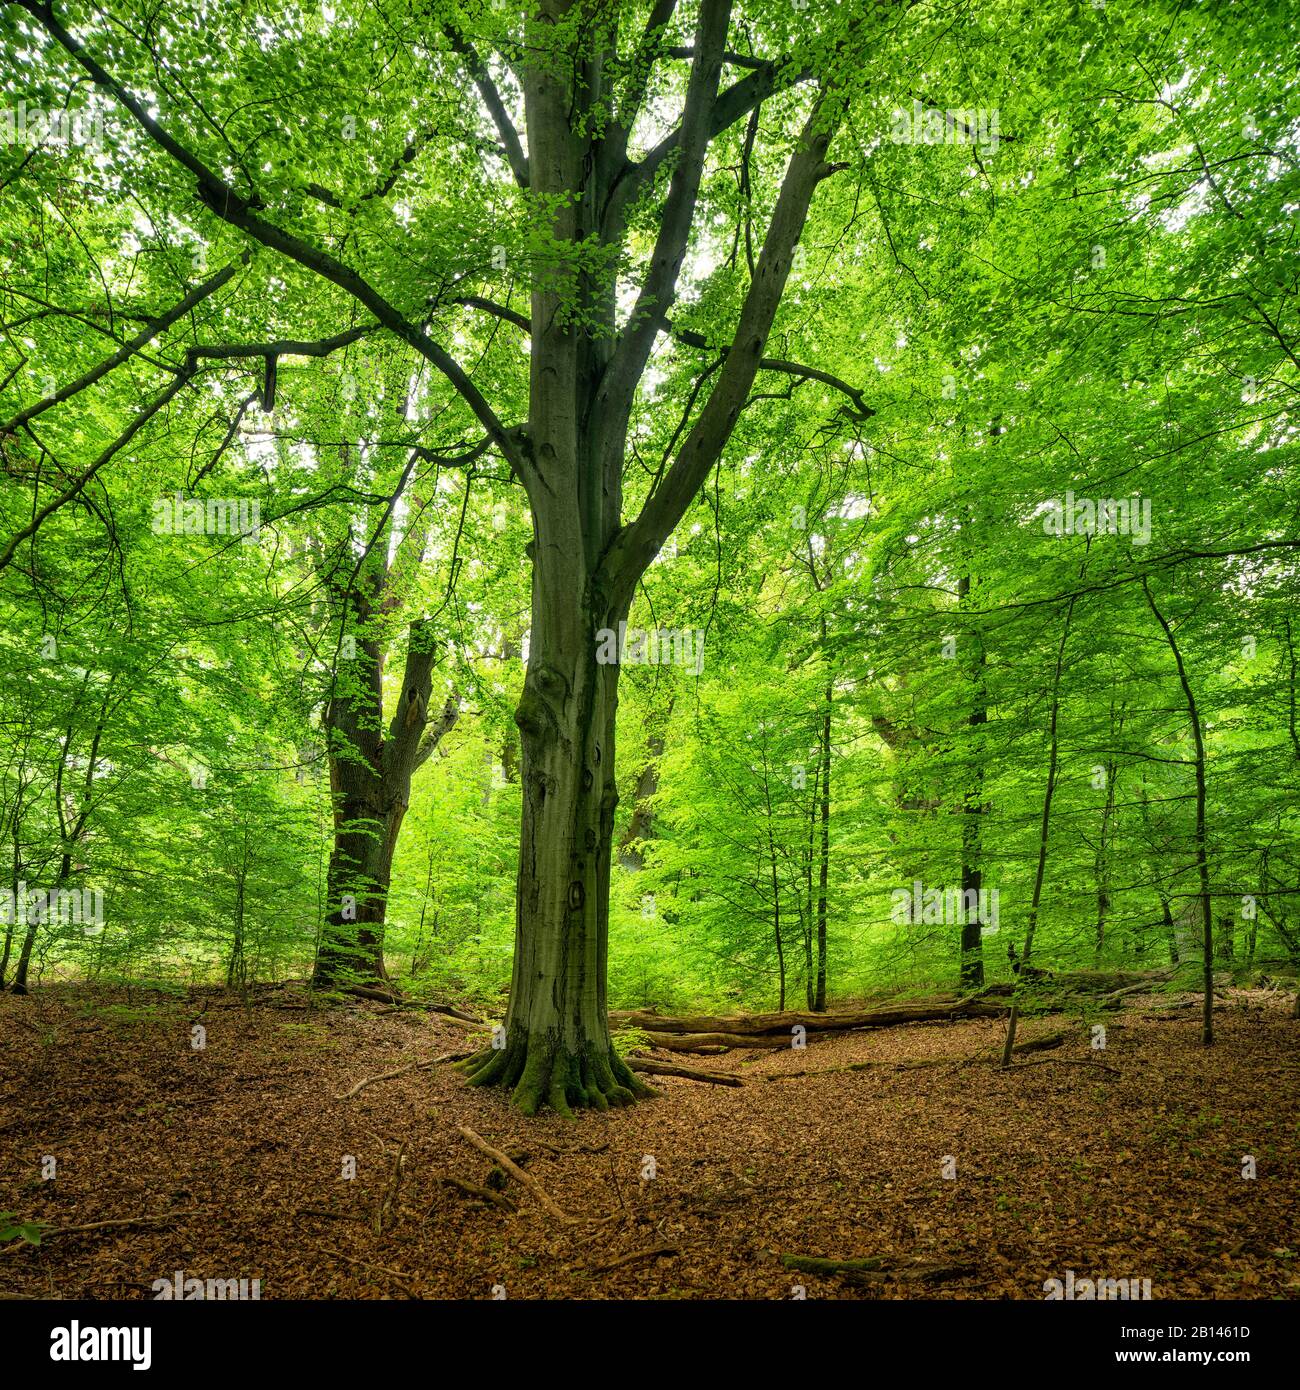 Untouched natural mixed deciduous forest with old beech and oak trees, Sababurg Primeval Forest, Reinhardswald, Hesse, Germany Stock Photo